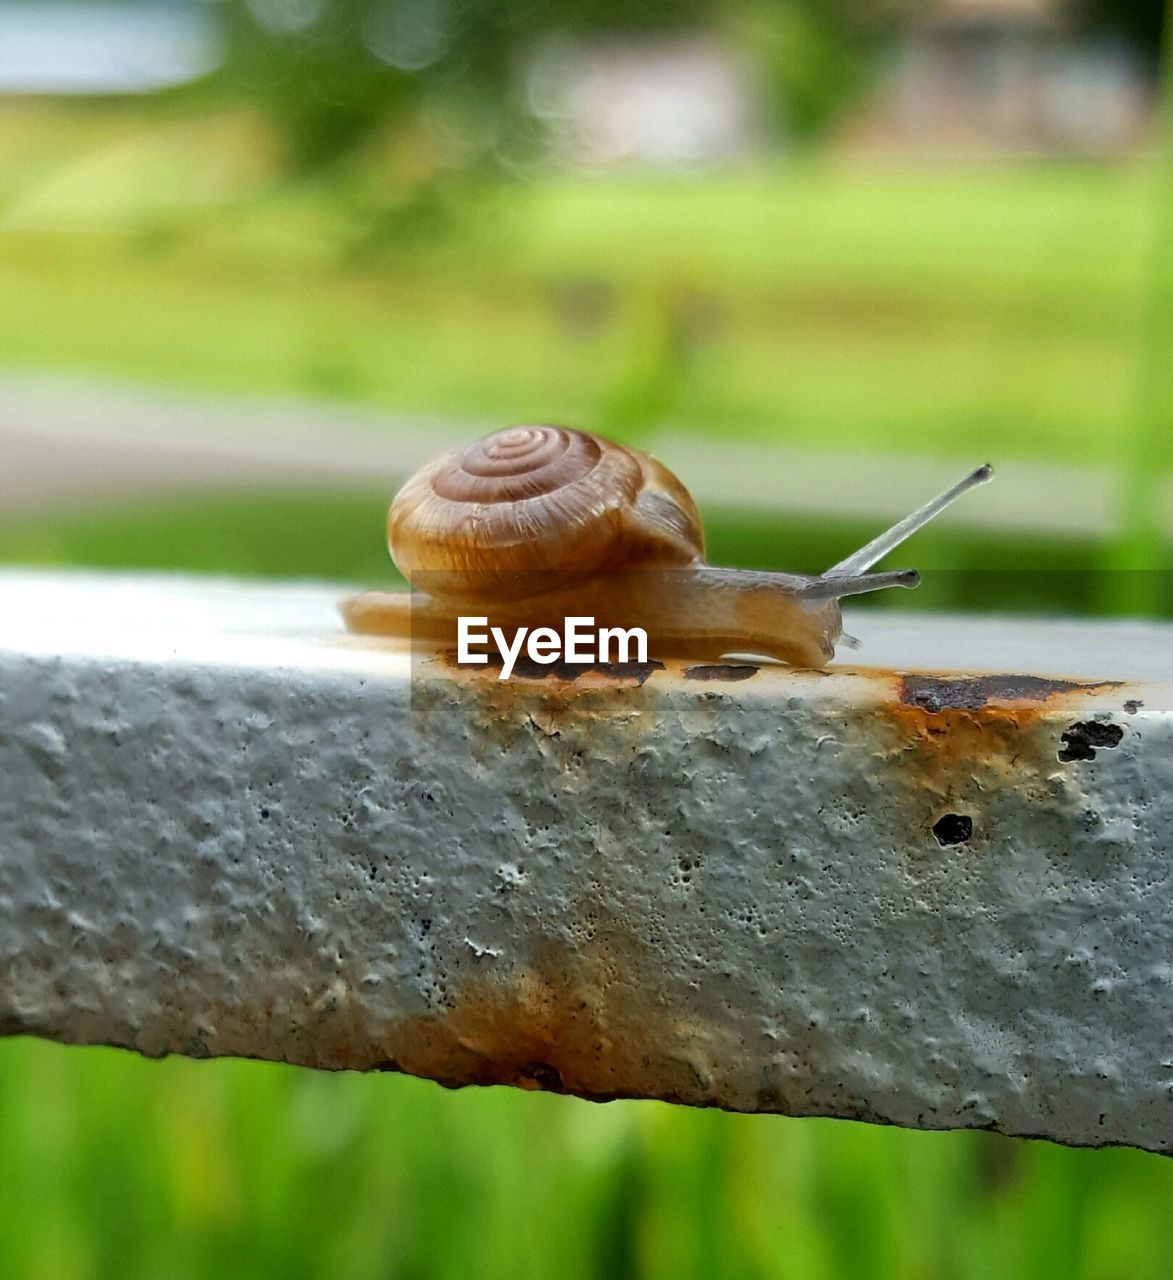 Close-up of snail on railing